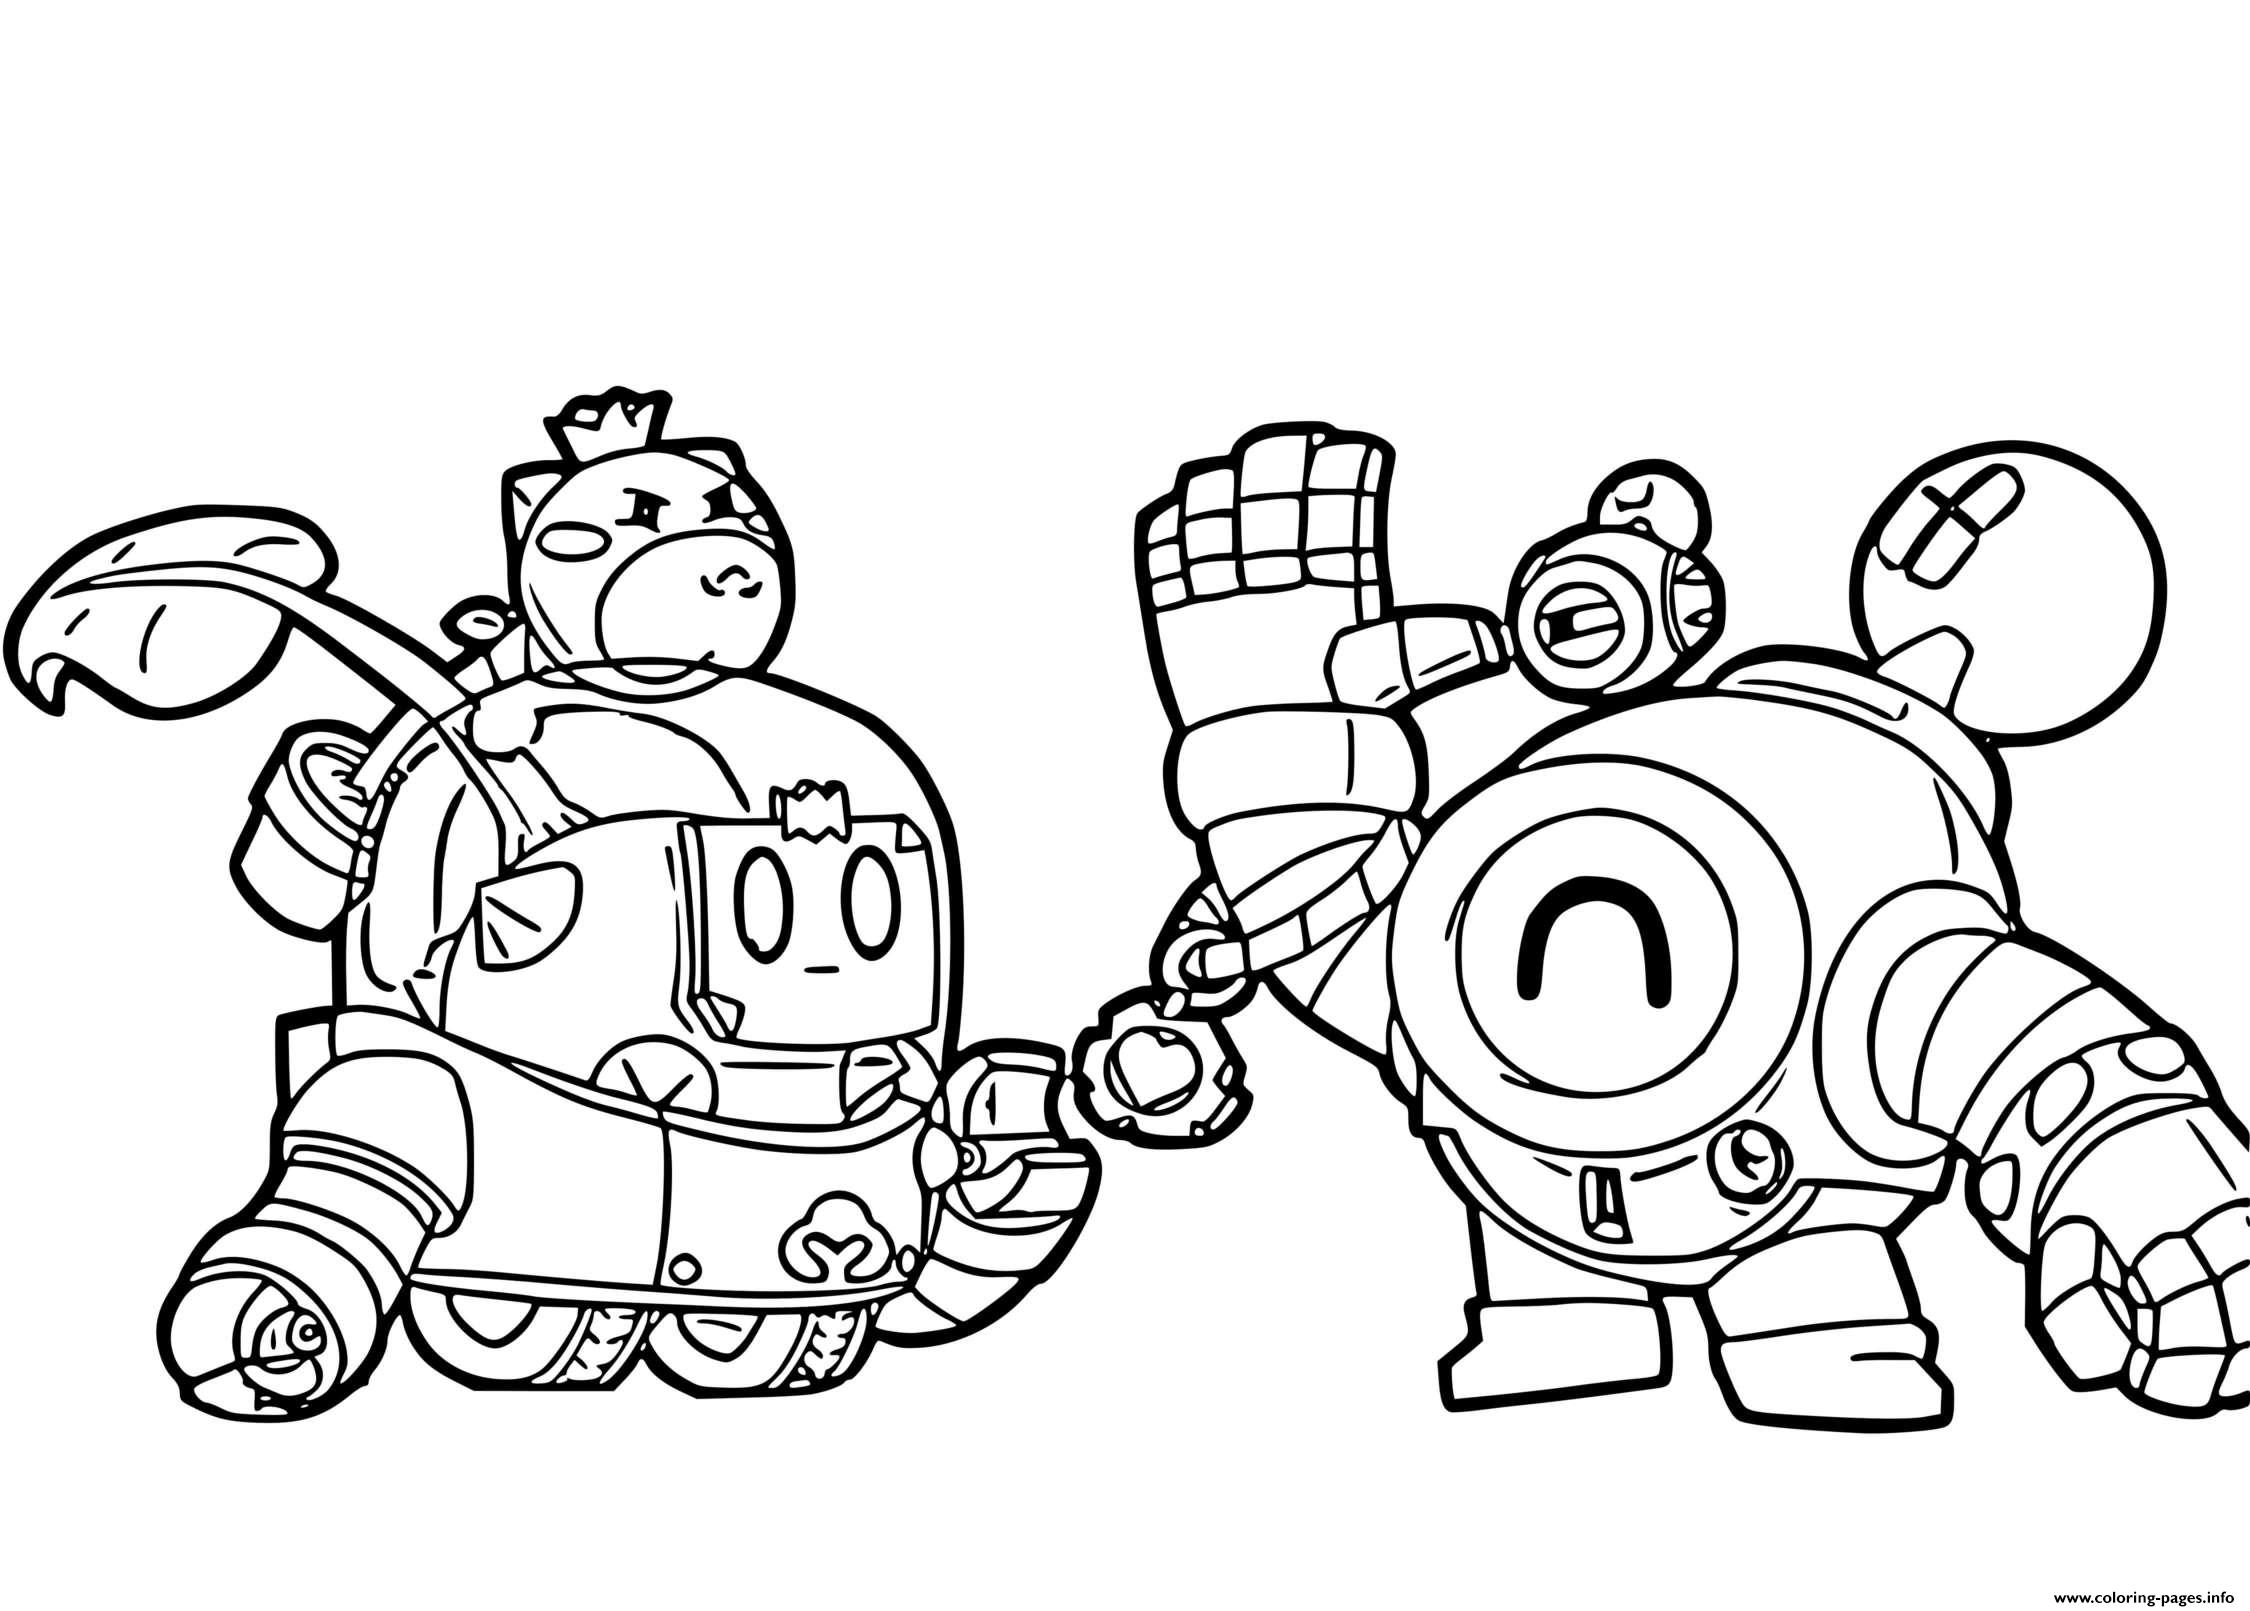 Sprout Et Nani Brawl Stars Coloring Pages Printable - brawl stars coloring pages surge